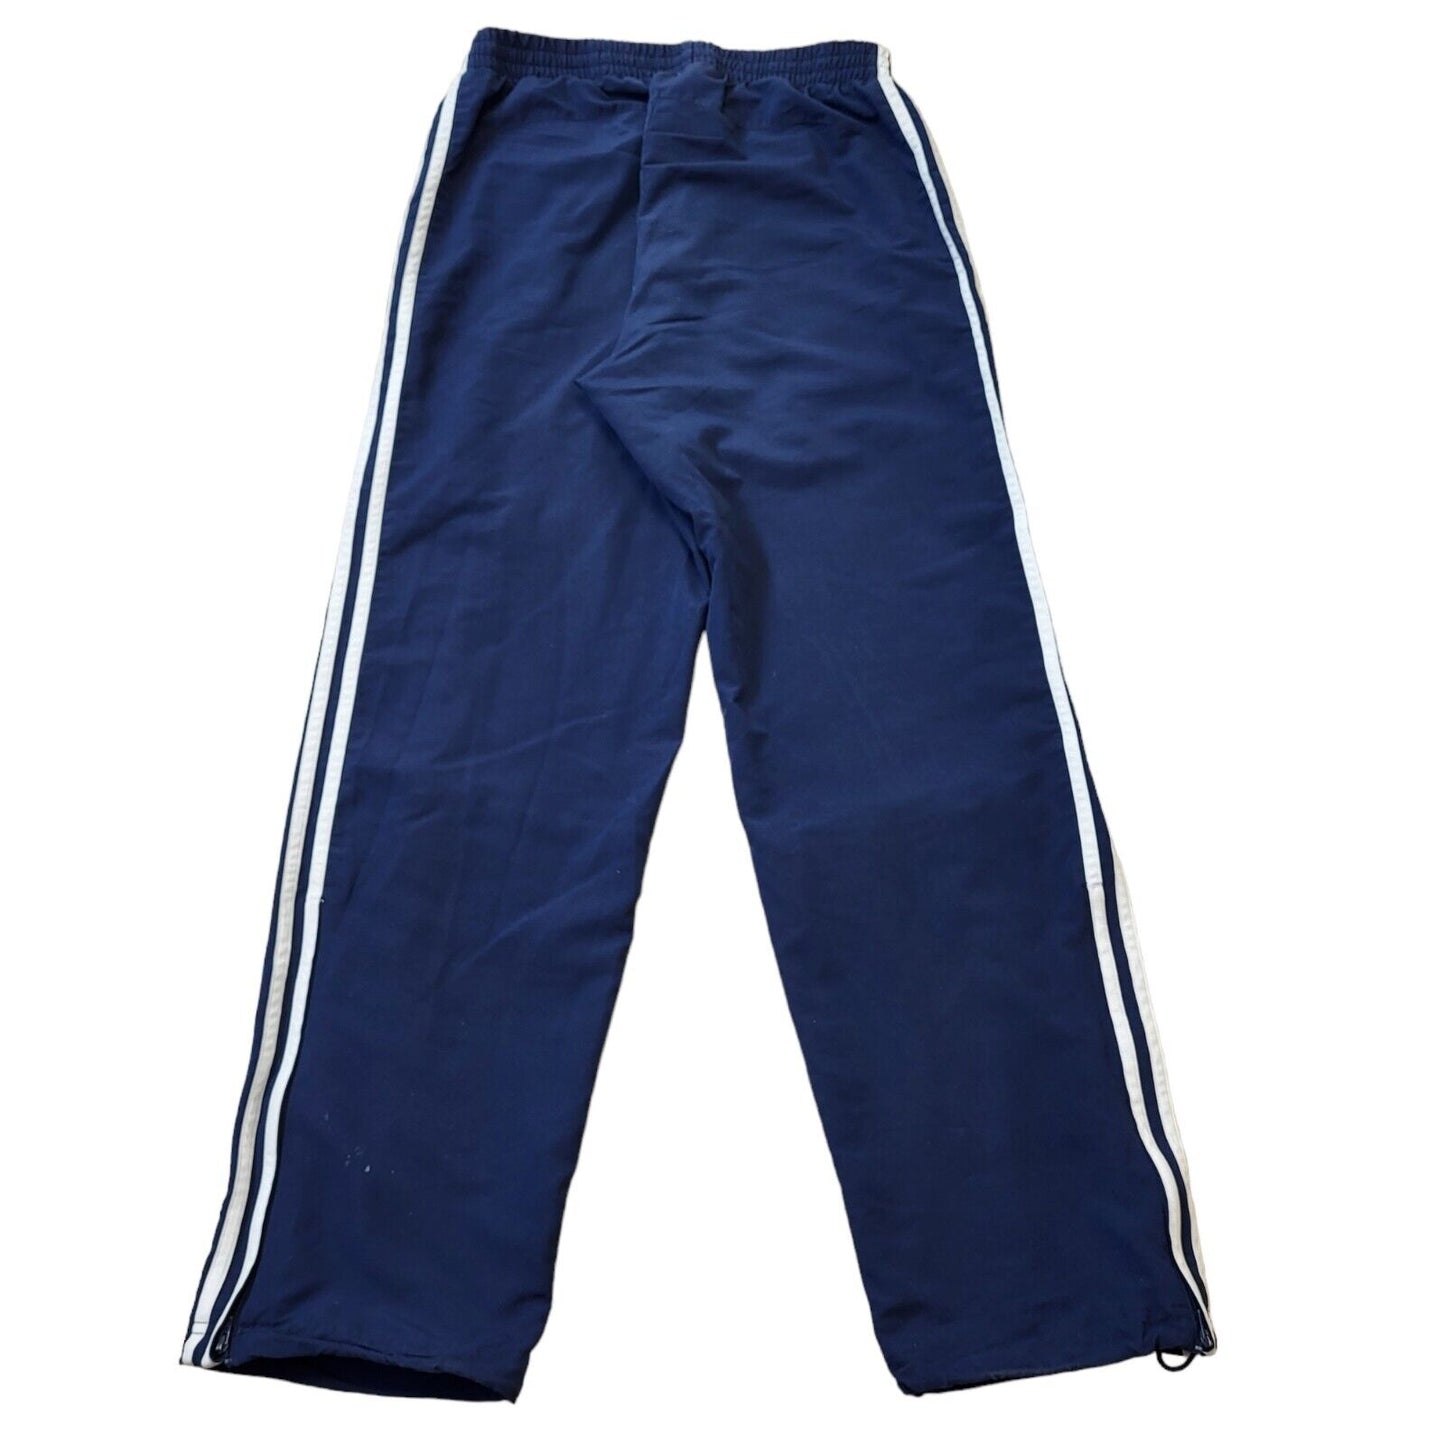 Adidas Trousers (M)